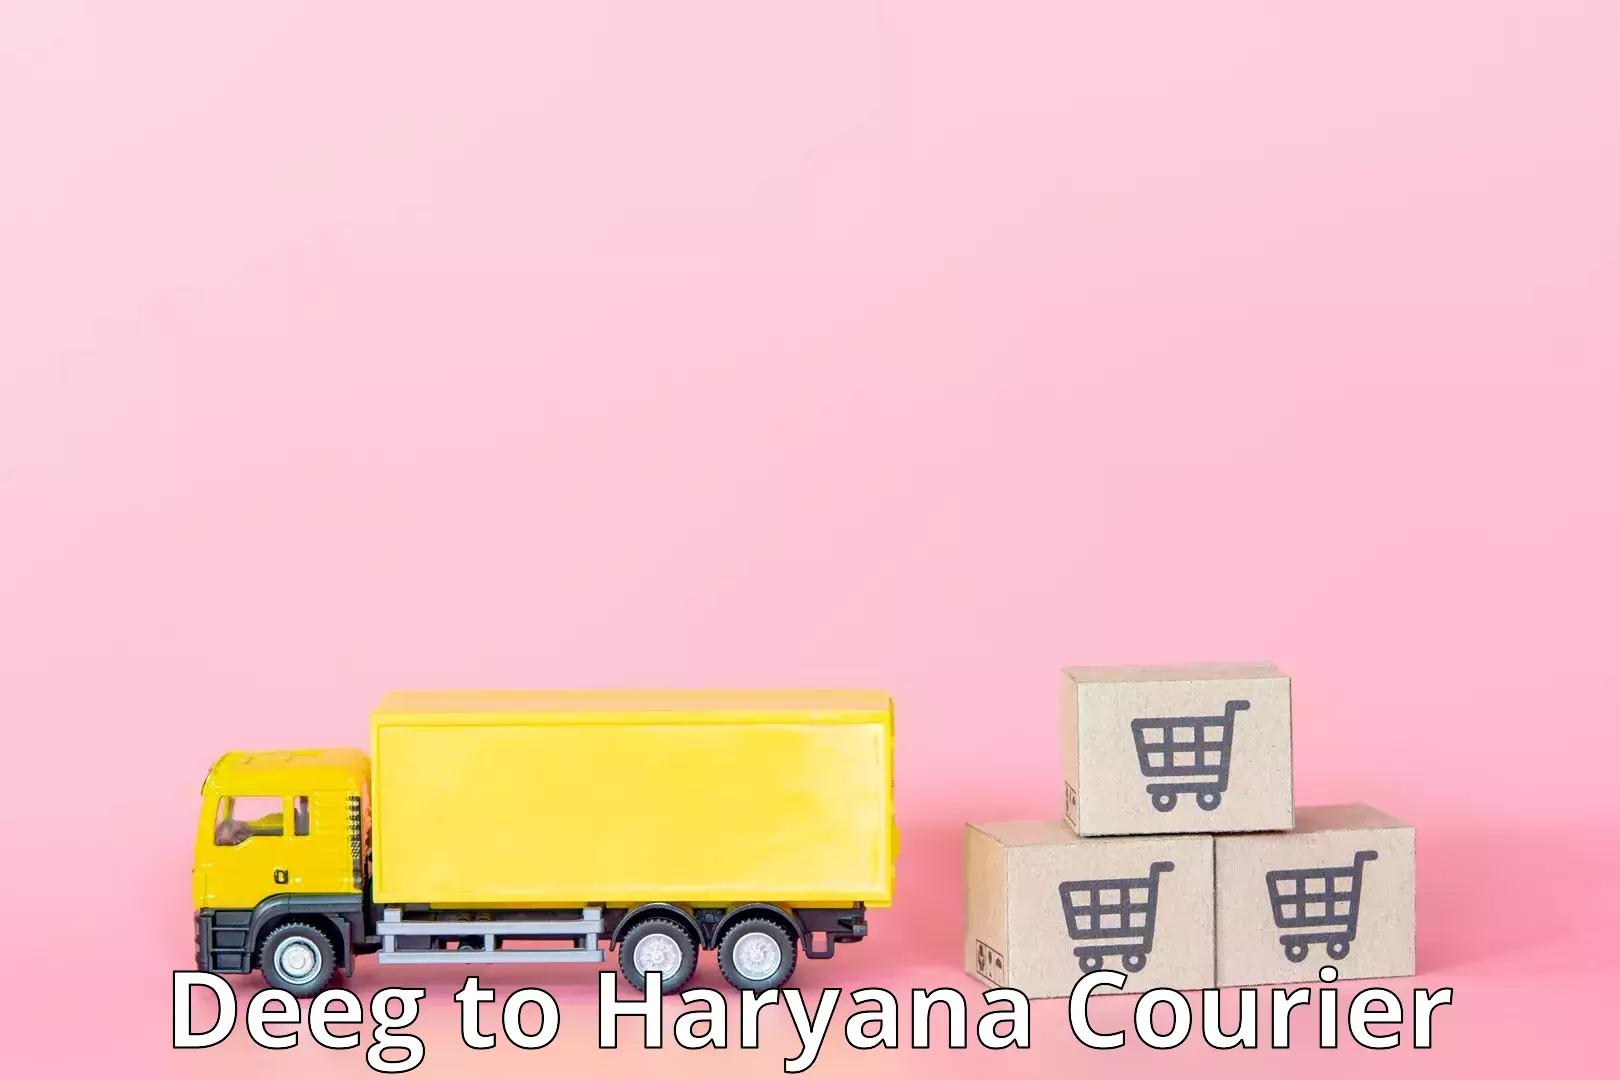 Courier rate comparison Deeg to NCR Haryana